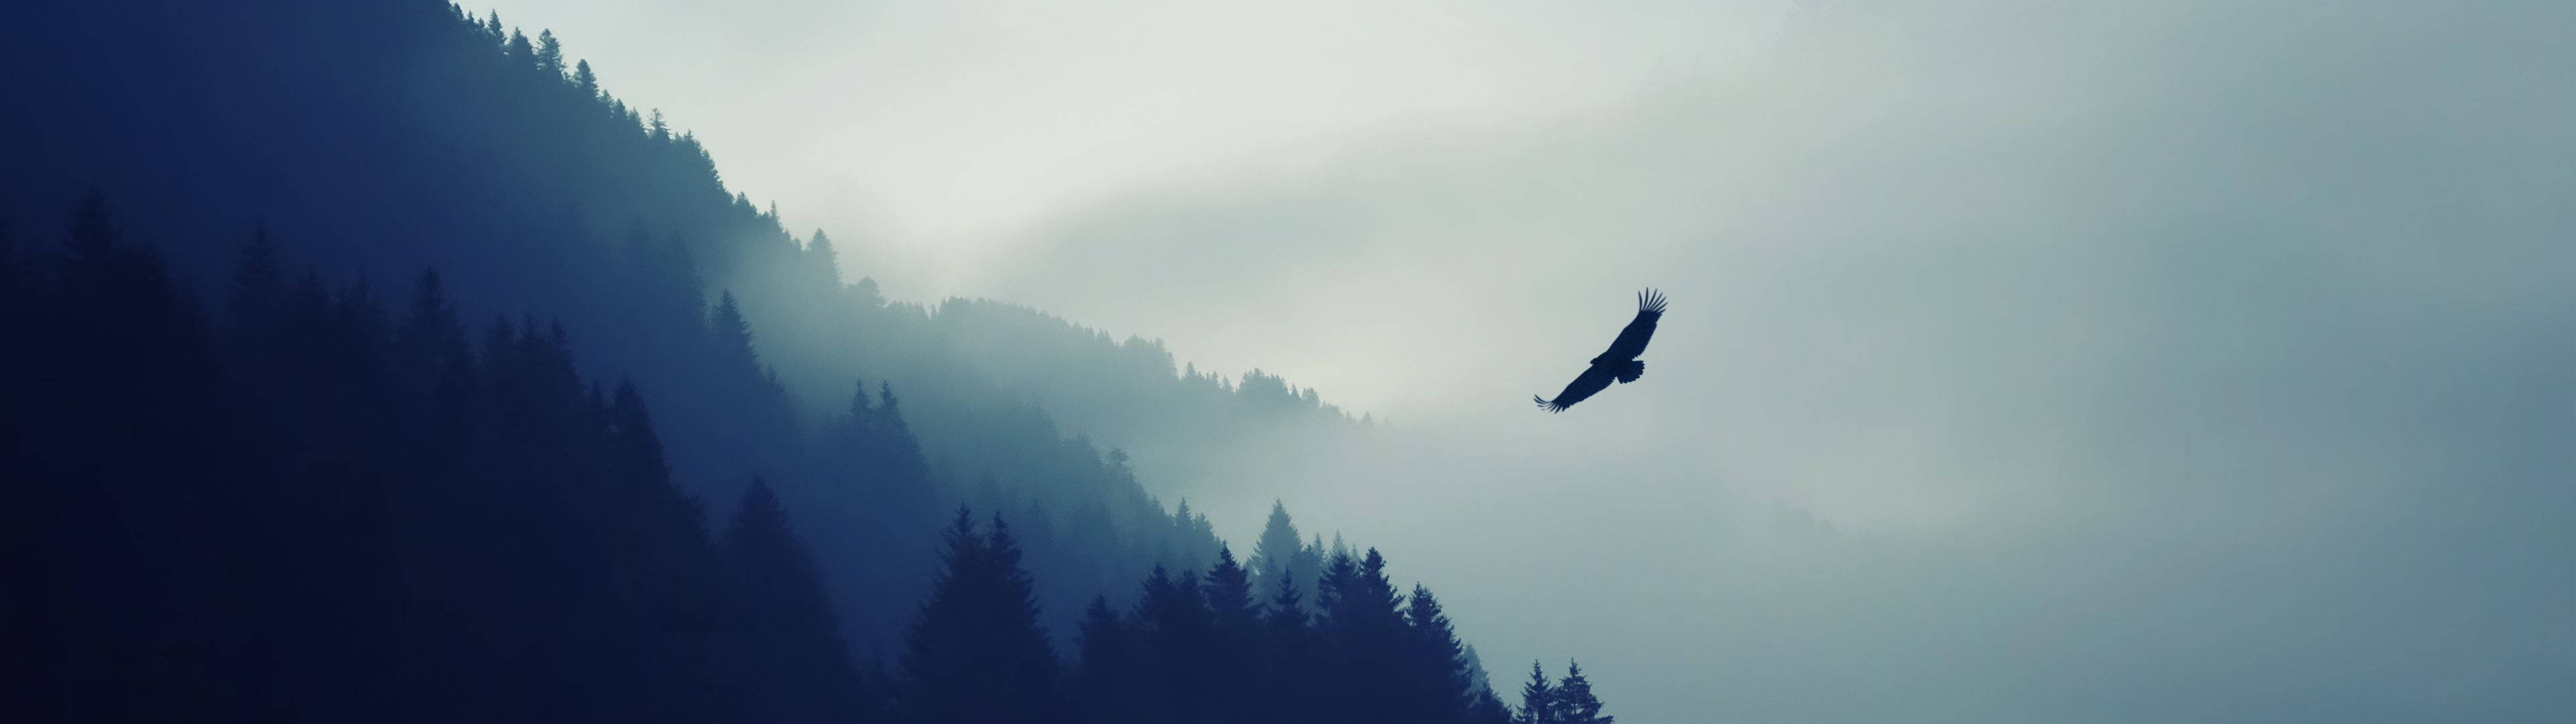 Image  View of Majestic Eagle Soaring Over Mountainside. Wallpaper